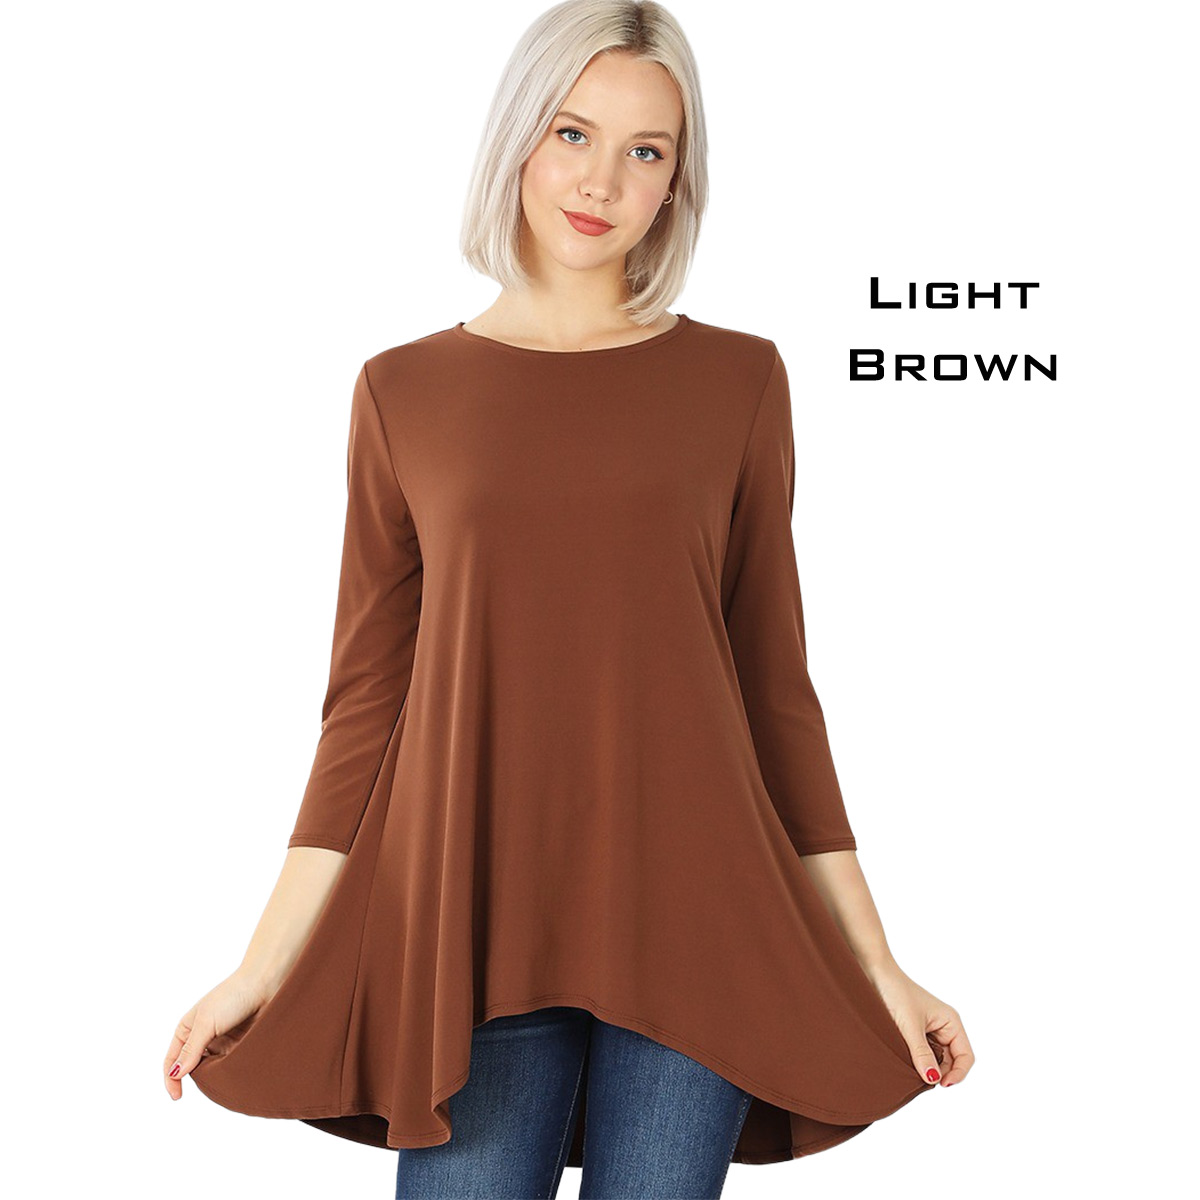 2367 - Ity High-Low 3/4 Sleeve Top LIGHT BROWN Ity High-Low 3/4 Sleeve Top 2367 - Large